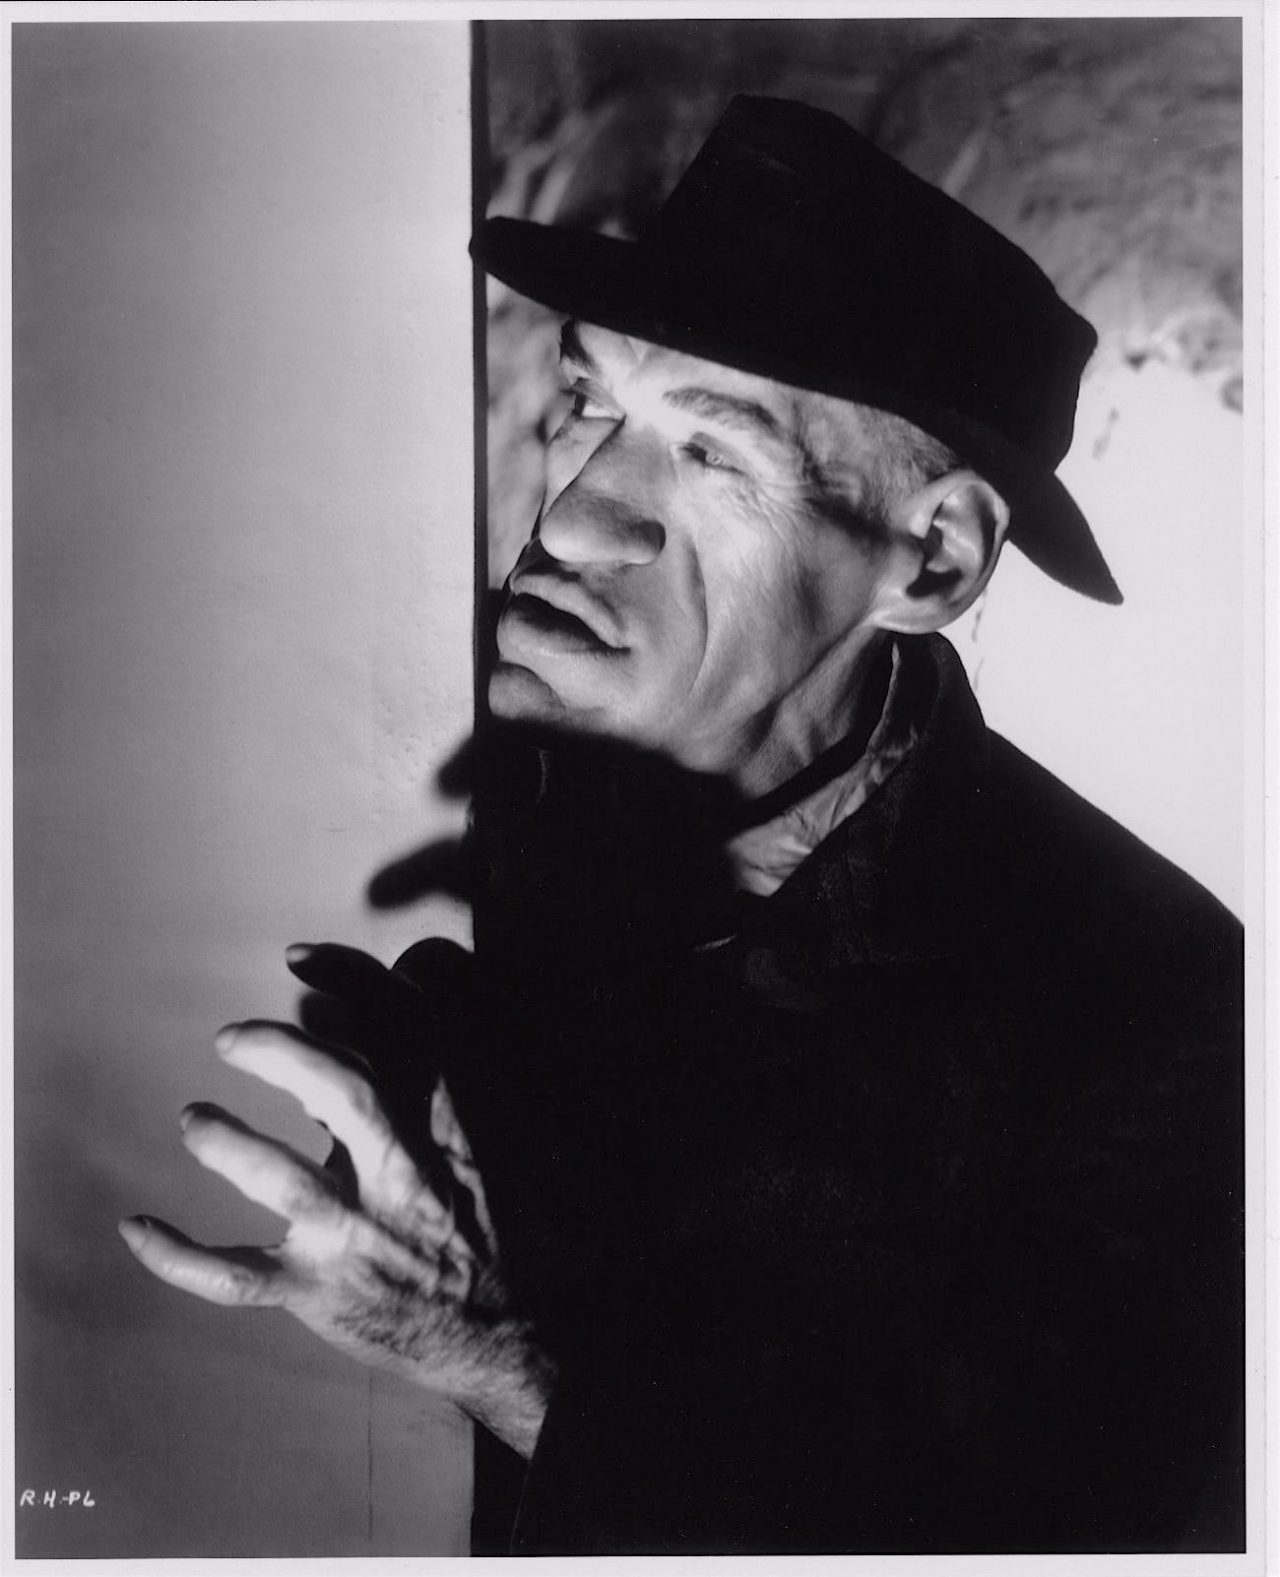 Meet Rondo Hatton or With a Face like that, You ought to be in Movies ...